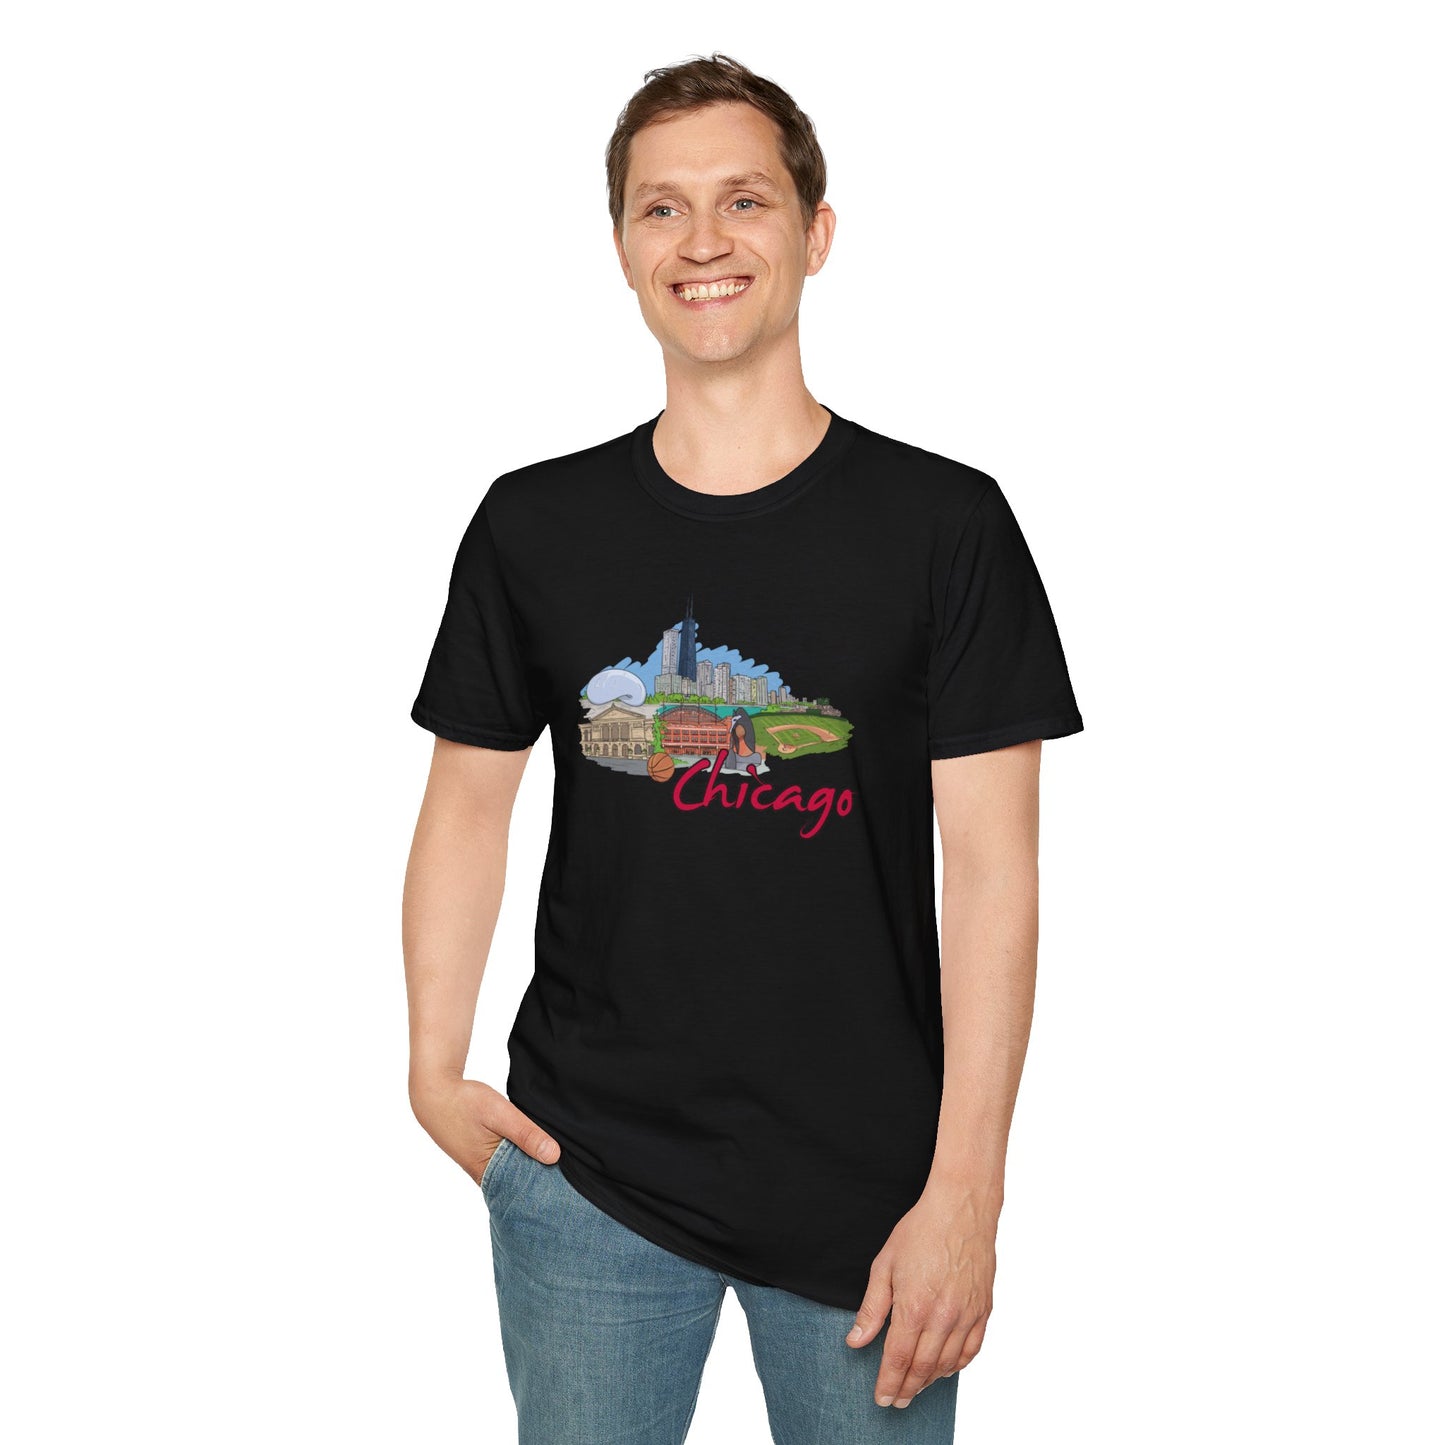 Explore the Windy City Vibes with Our Stylish Chicago-Inspired T-Shirt